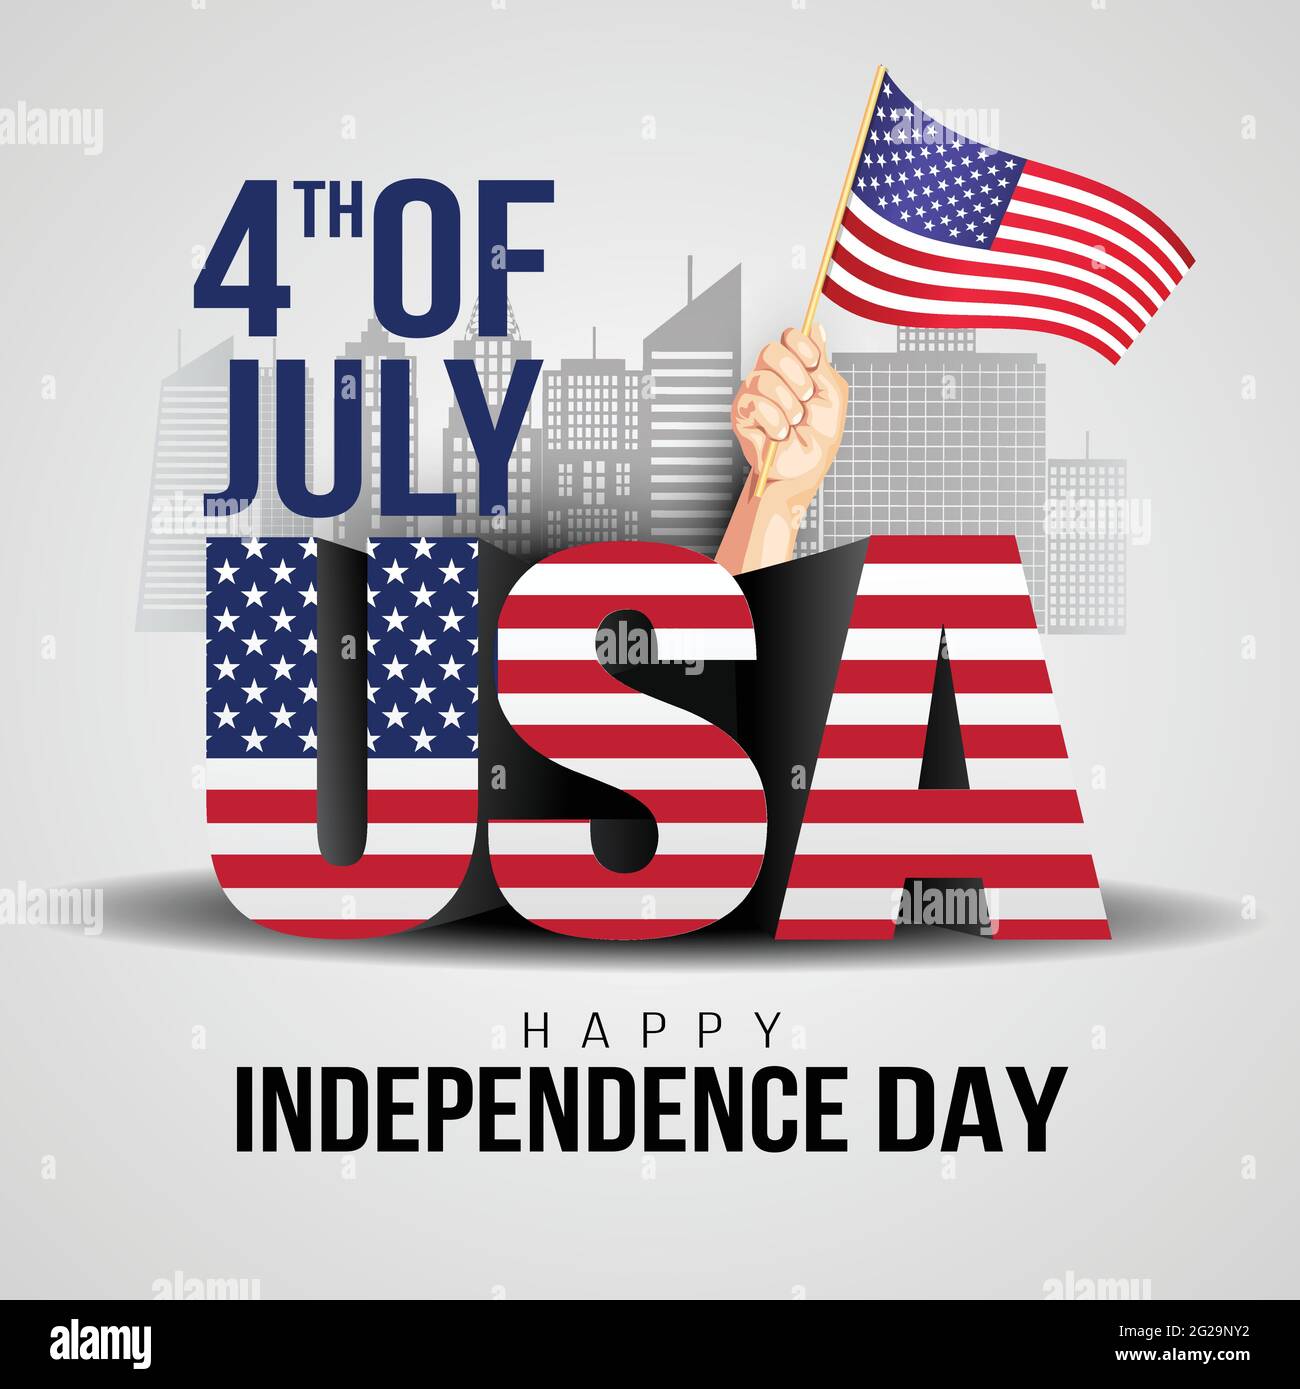 happy independence day america. vector illustration flag and 3d ...